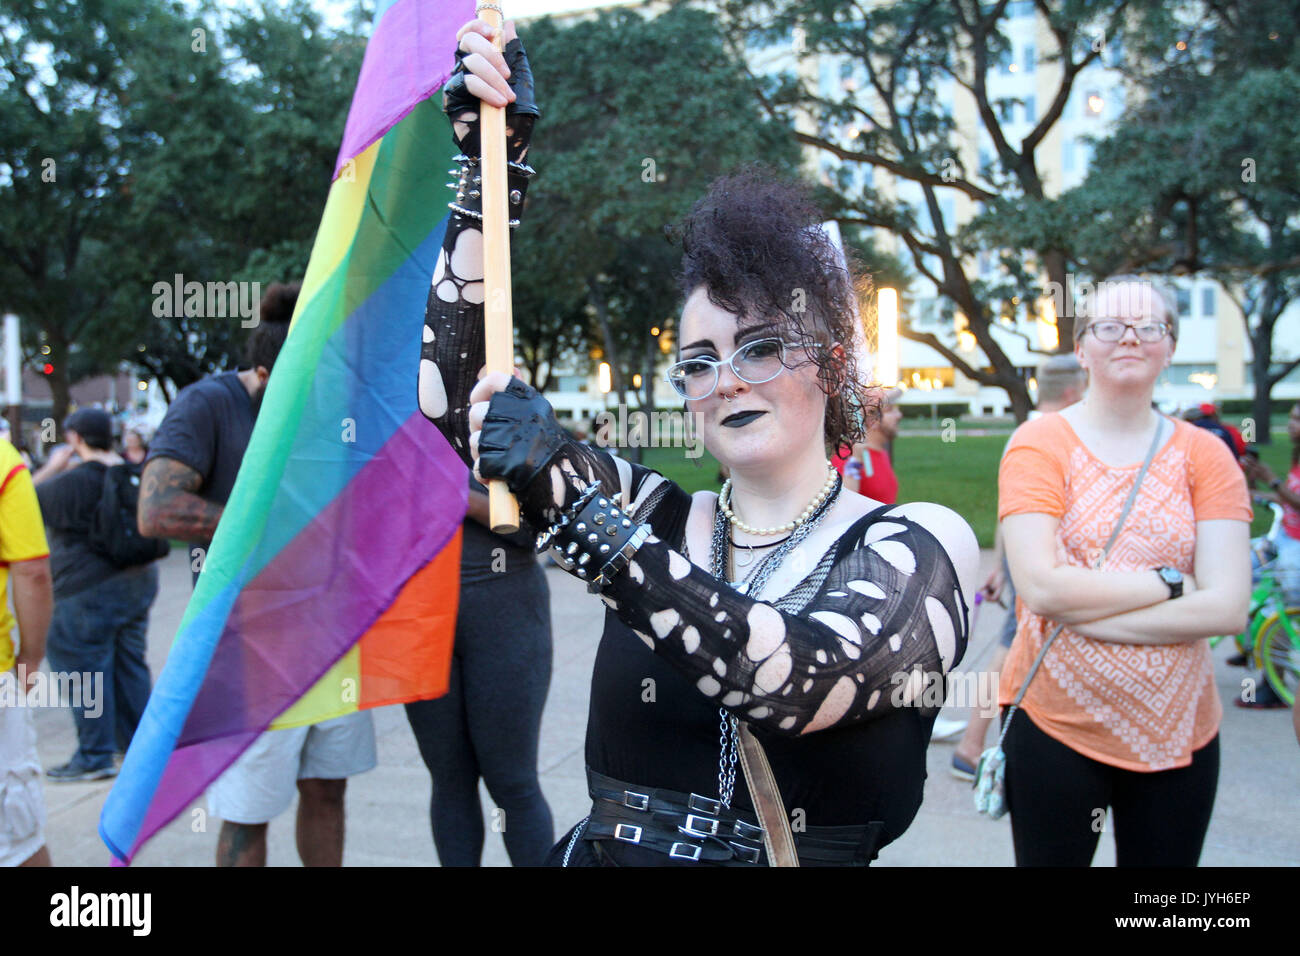 Dallas, Texas, USA. 19th Aug, 2017. A protestor holds an equality multicolor flag in support of gays, LGBT and all minorities during the Anti Racism Rall in front of City Hall in downtown Dallas on Sturday August 19, 2017 Credit: Jaime Carrero/ZUMA Wire/ZUMAPRESS.com/Alamy Live News Stock Photo